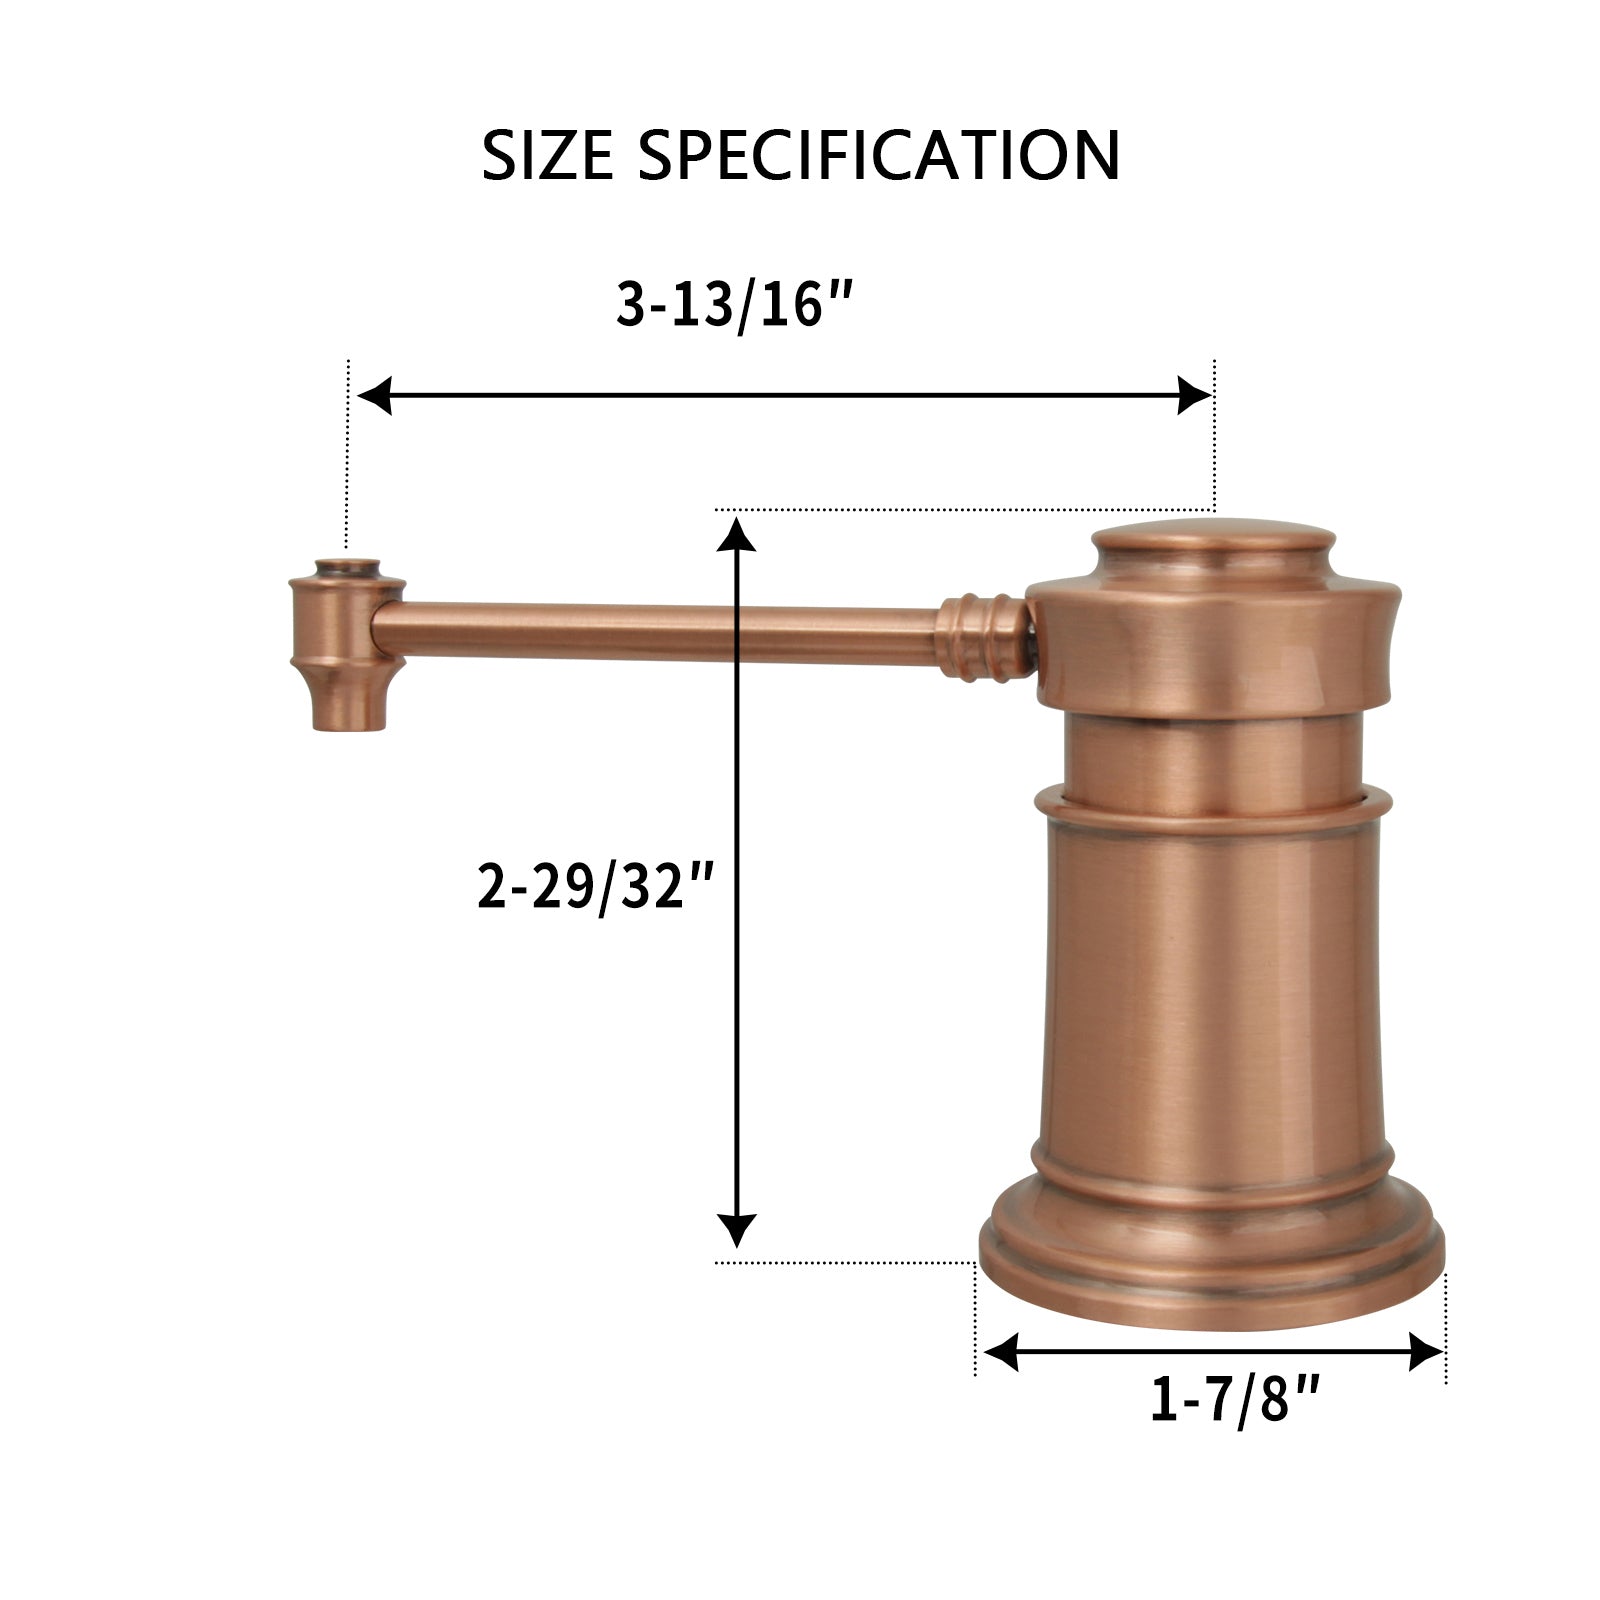 Built in Copper Soap Dispenser Refill from Top with 17 OZ Bottle - AK81018C